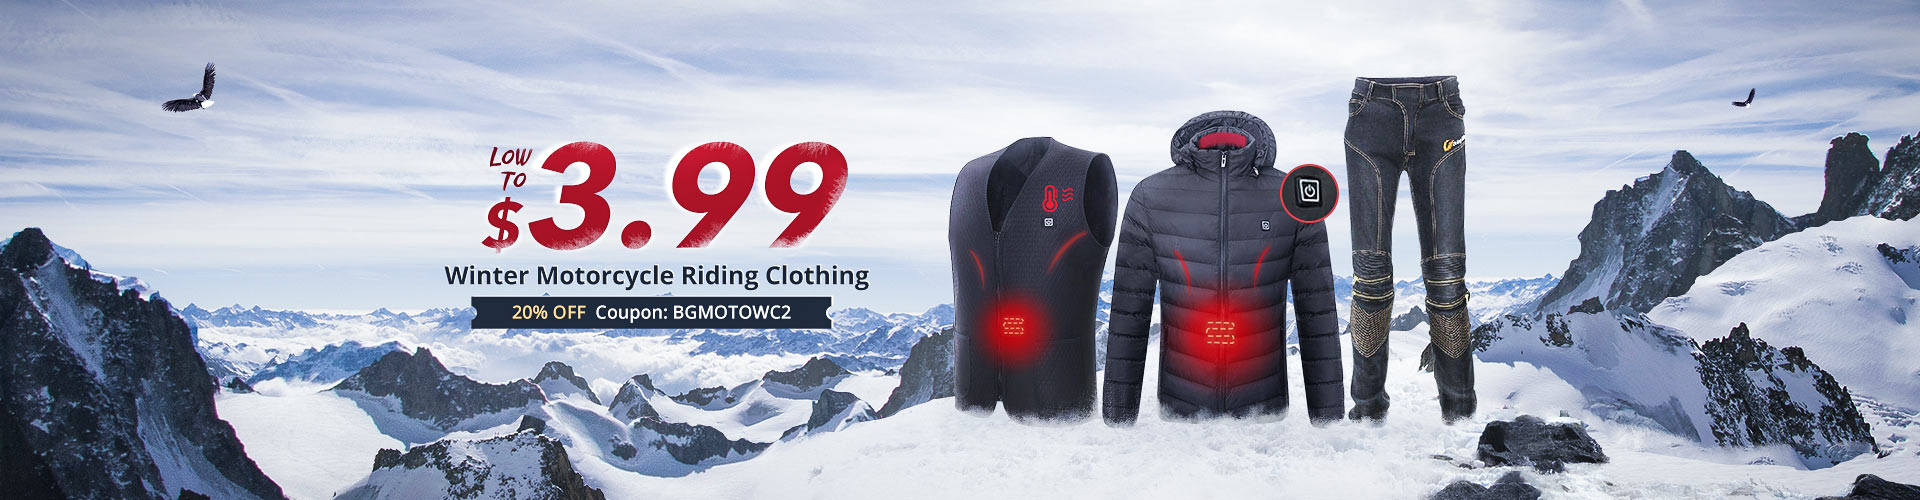 20% OFF For Motorcycle Winter Clothing